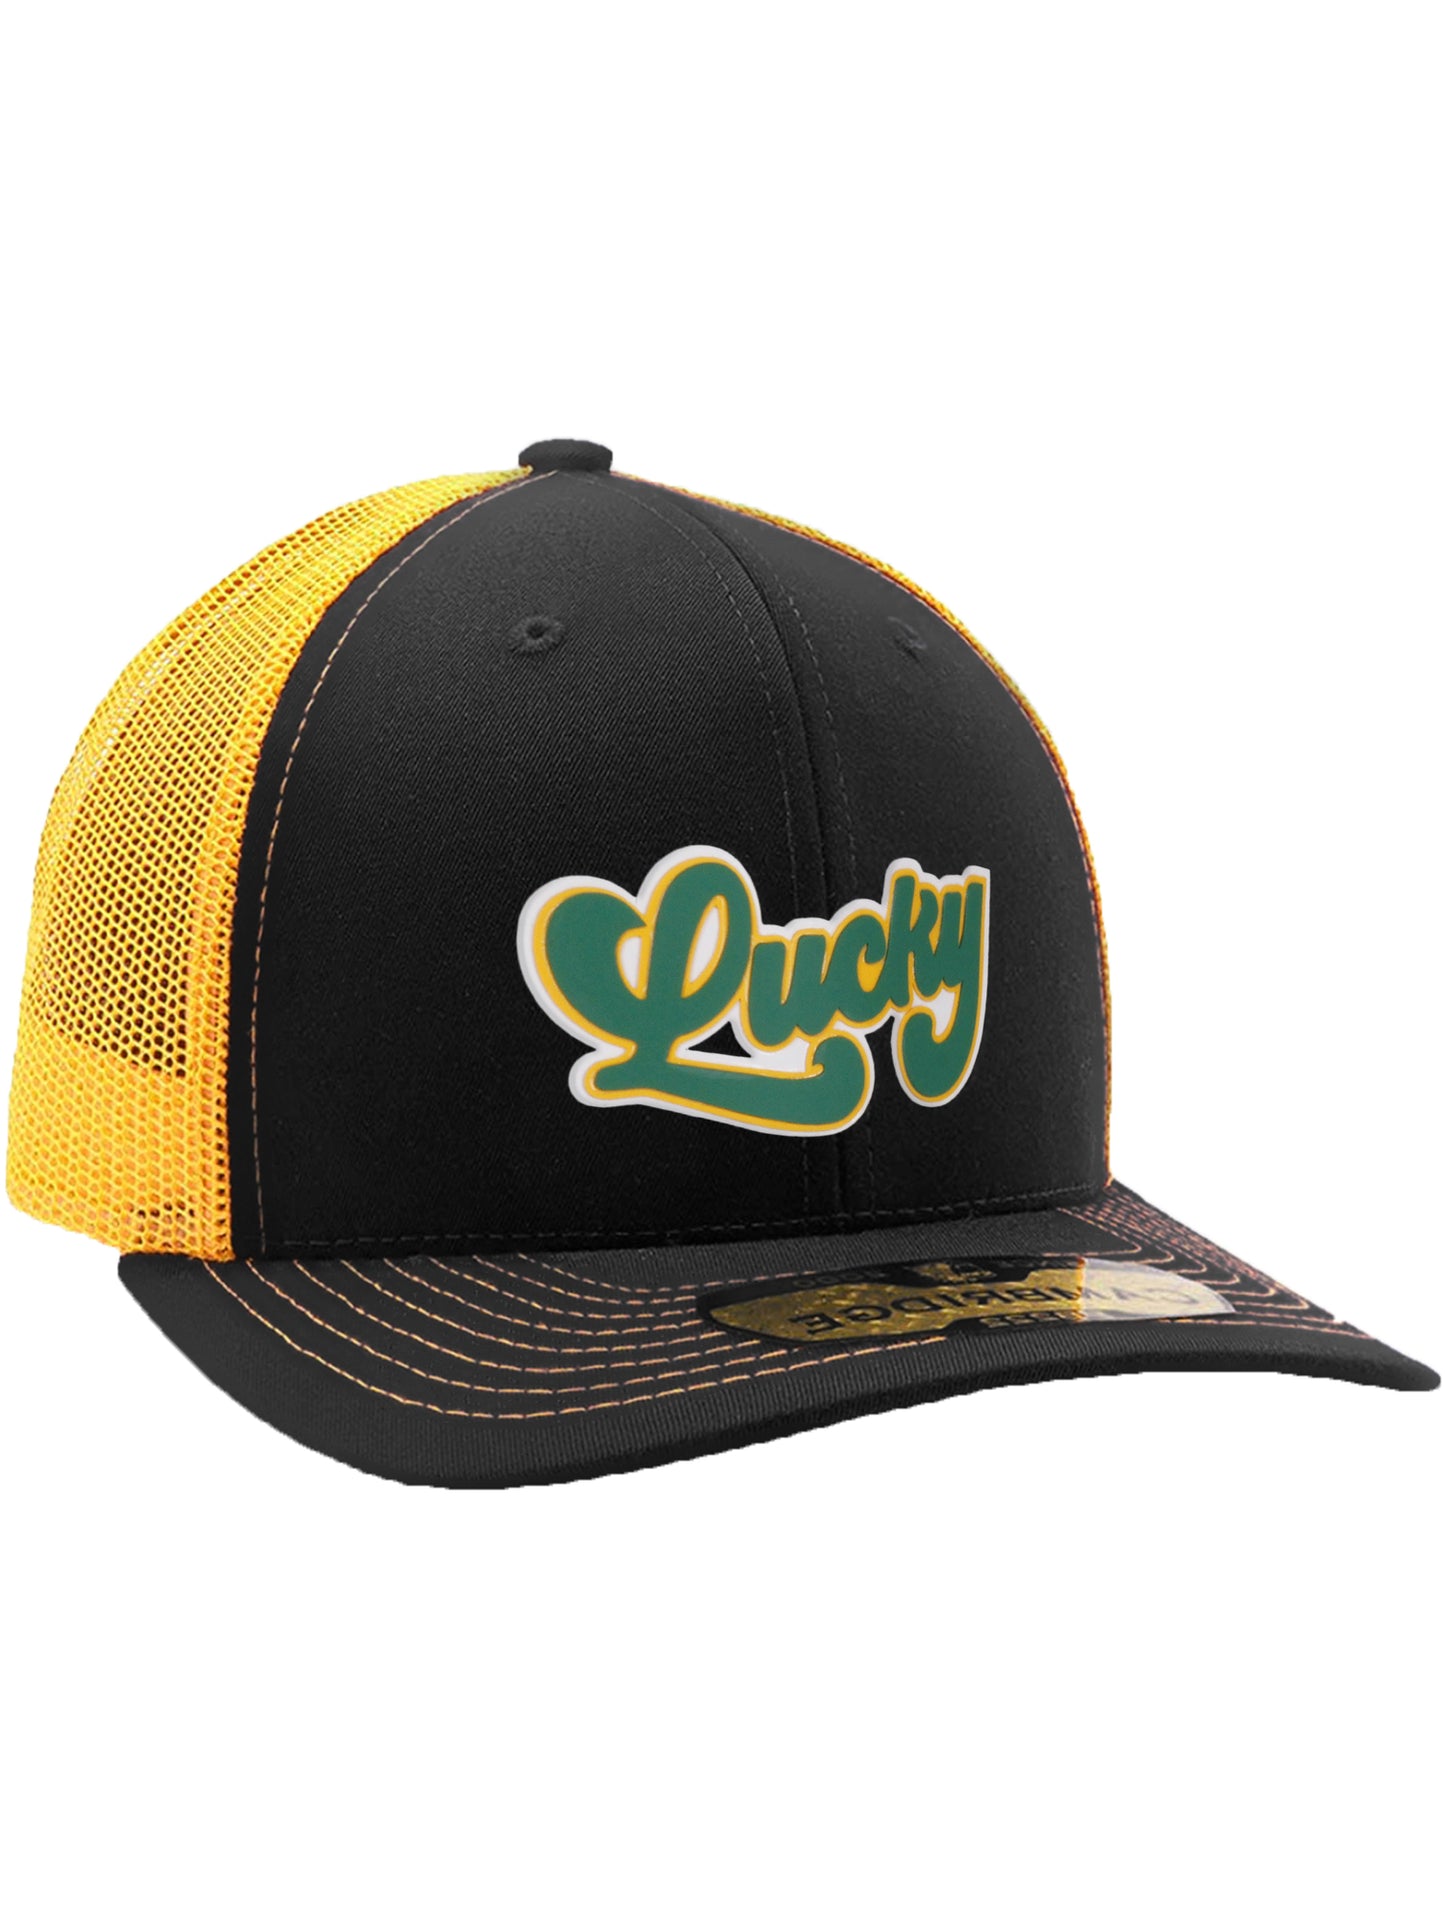 Daxton Baseball Trucker Hat St.Patrick Day 3D Lucky Clover Structured Mid Profile Cap